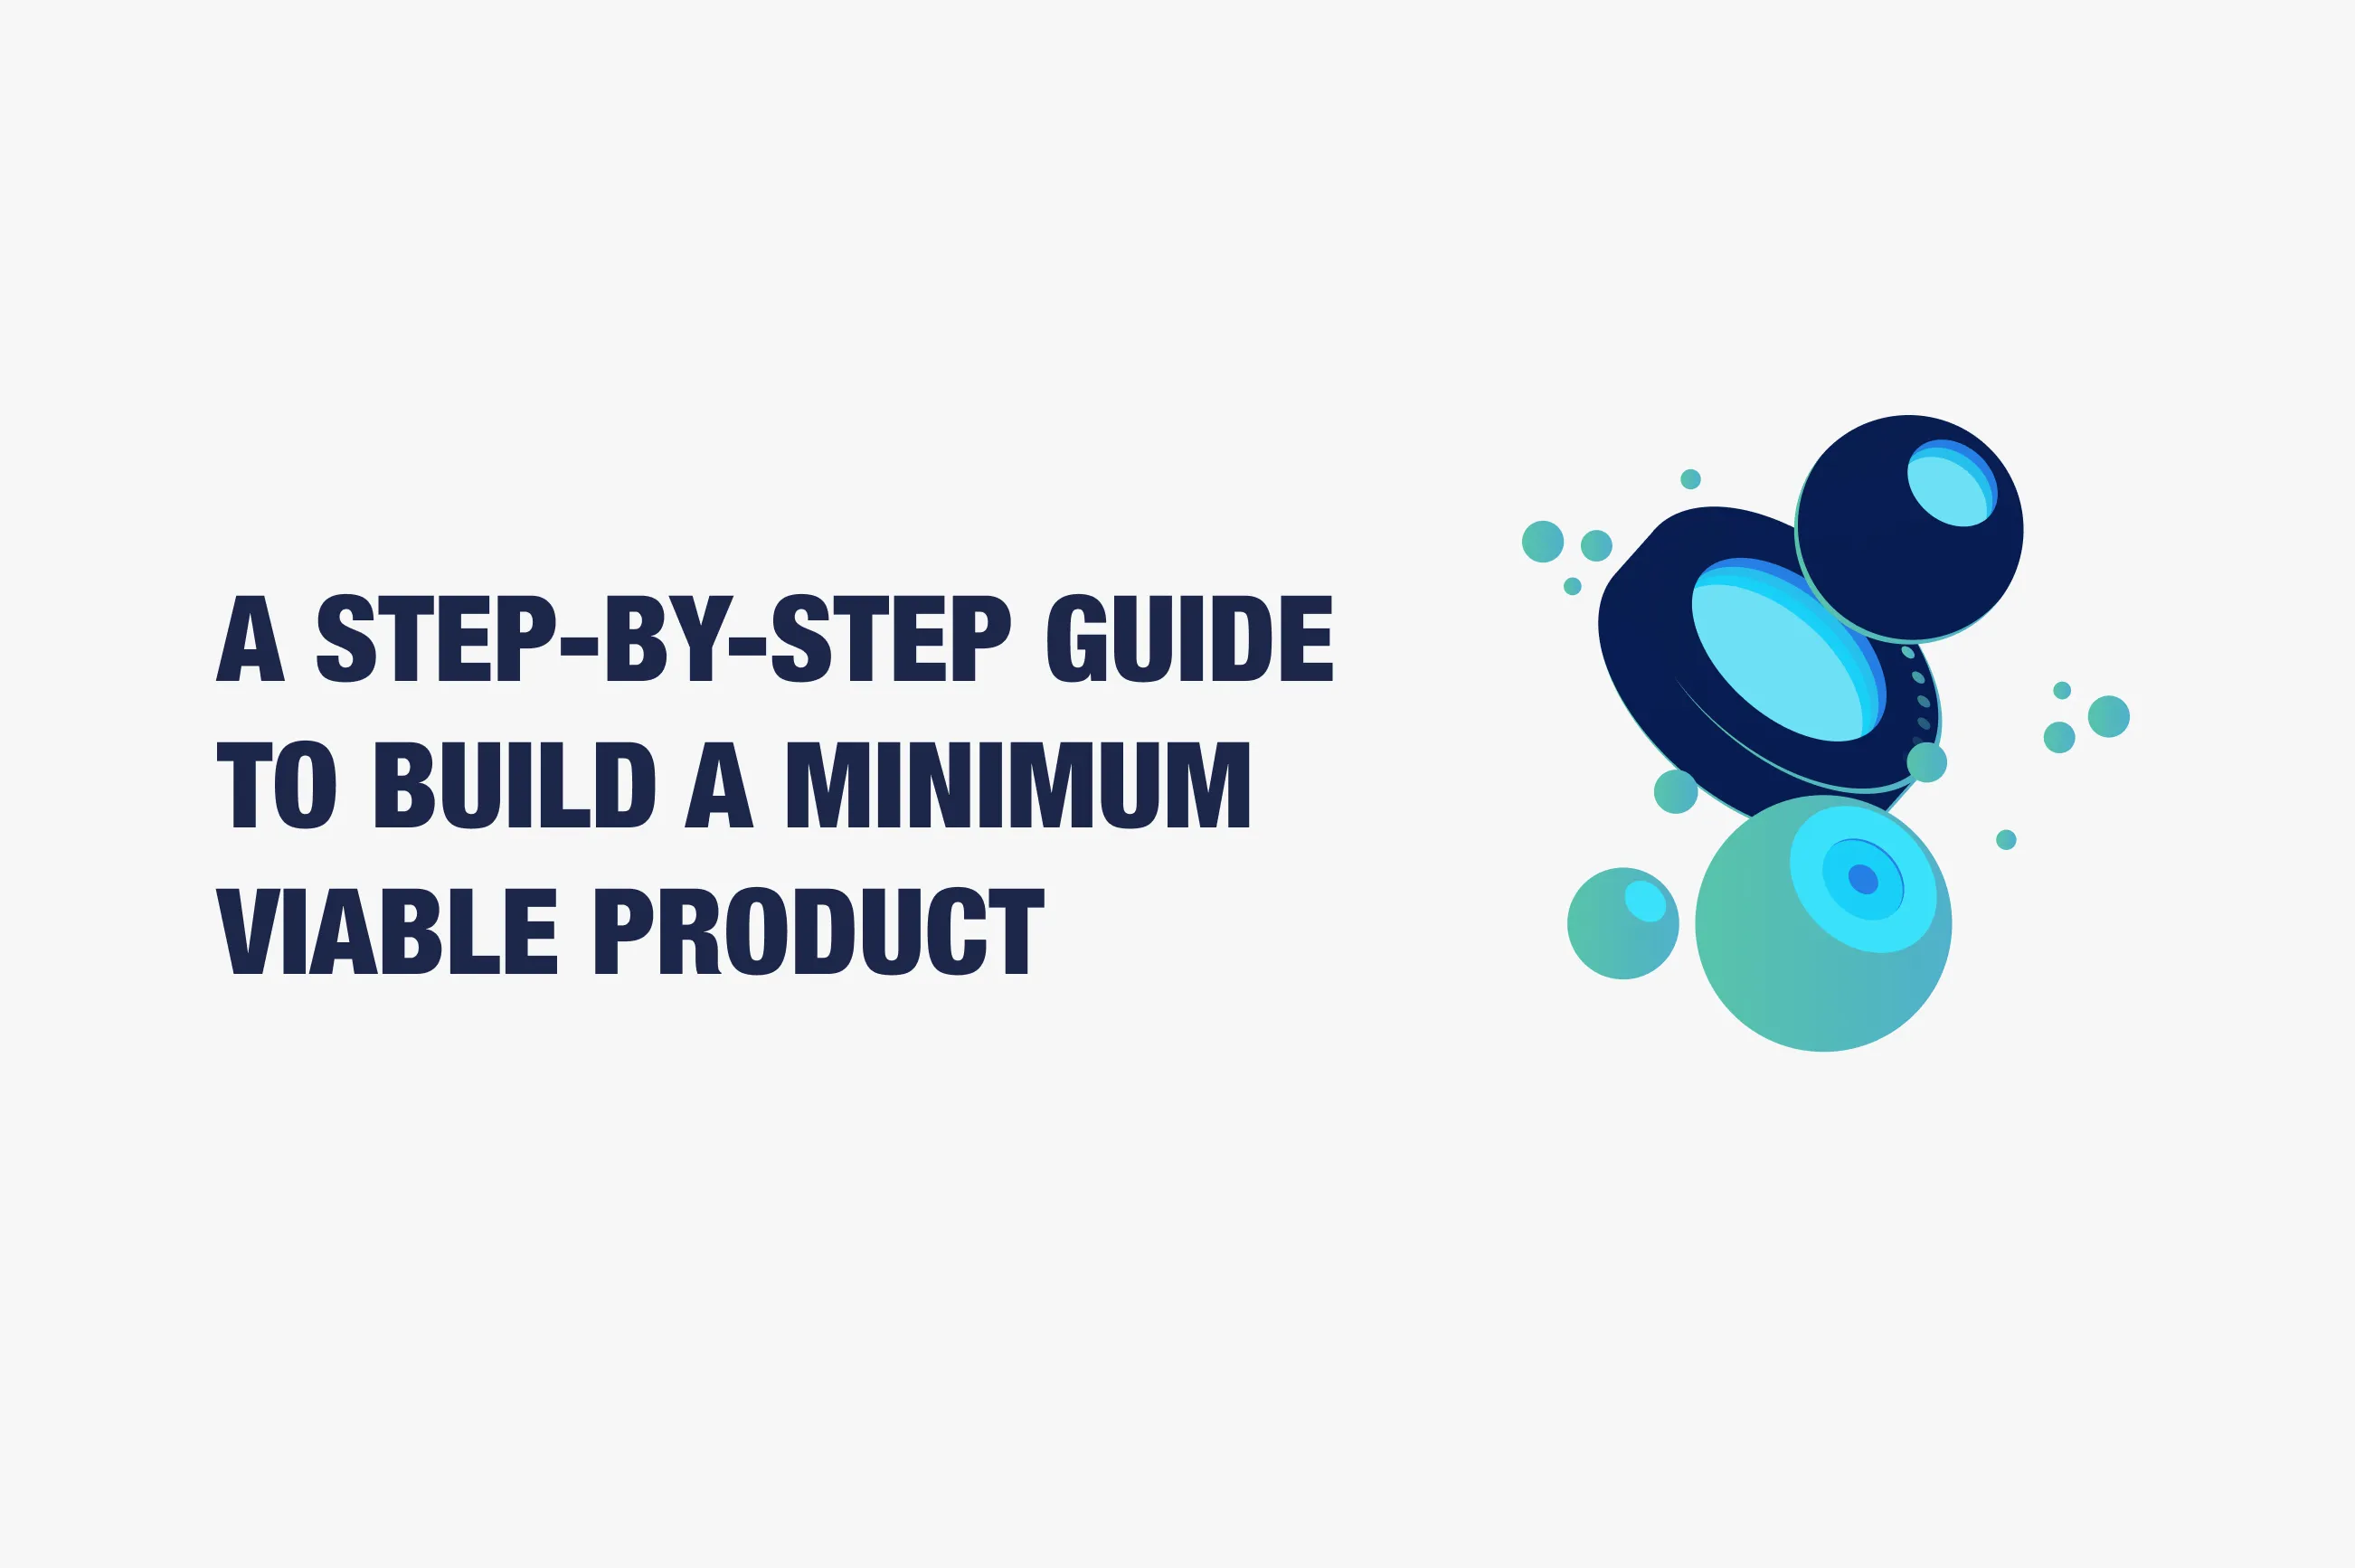 A Step-by-Step Guide to Build a Minimum Viable Product (MVP)